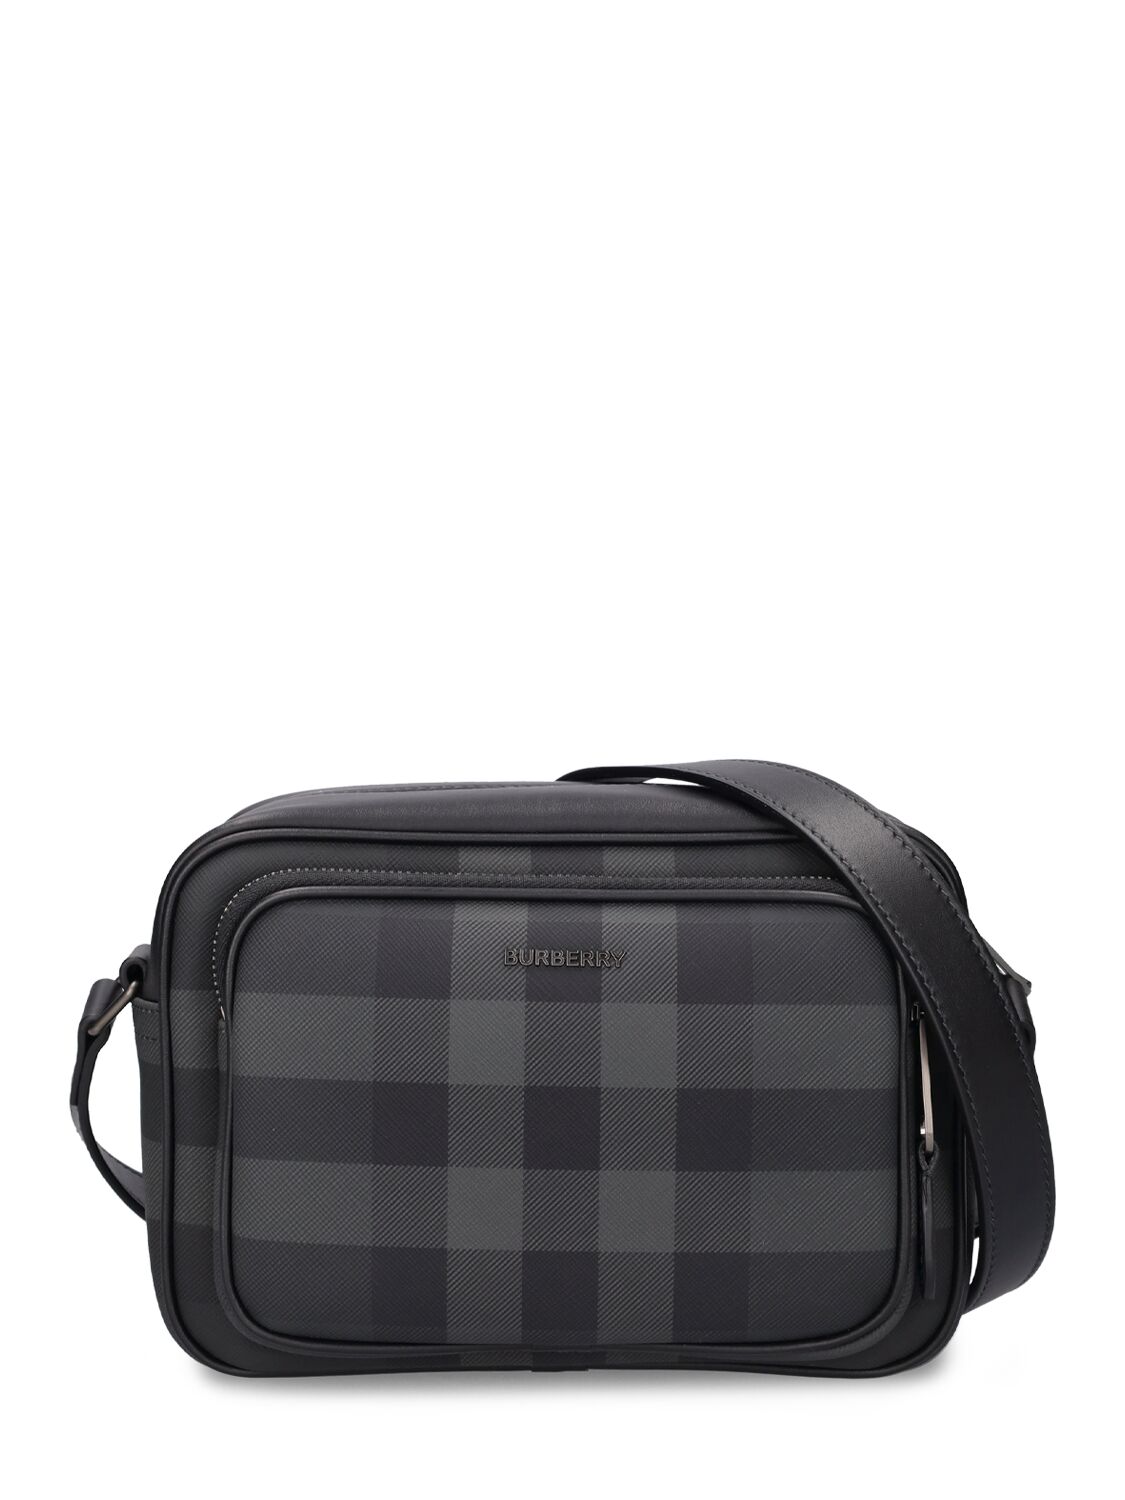 Burberry ml Paddy Brt Check Messenger Bag In Charcoal